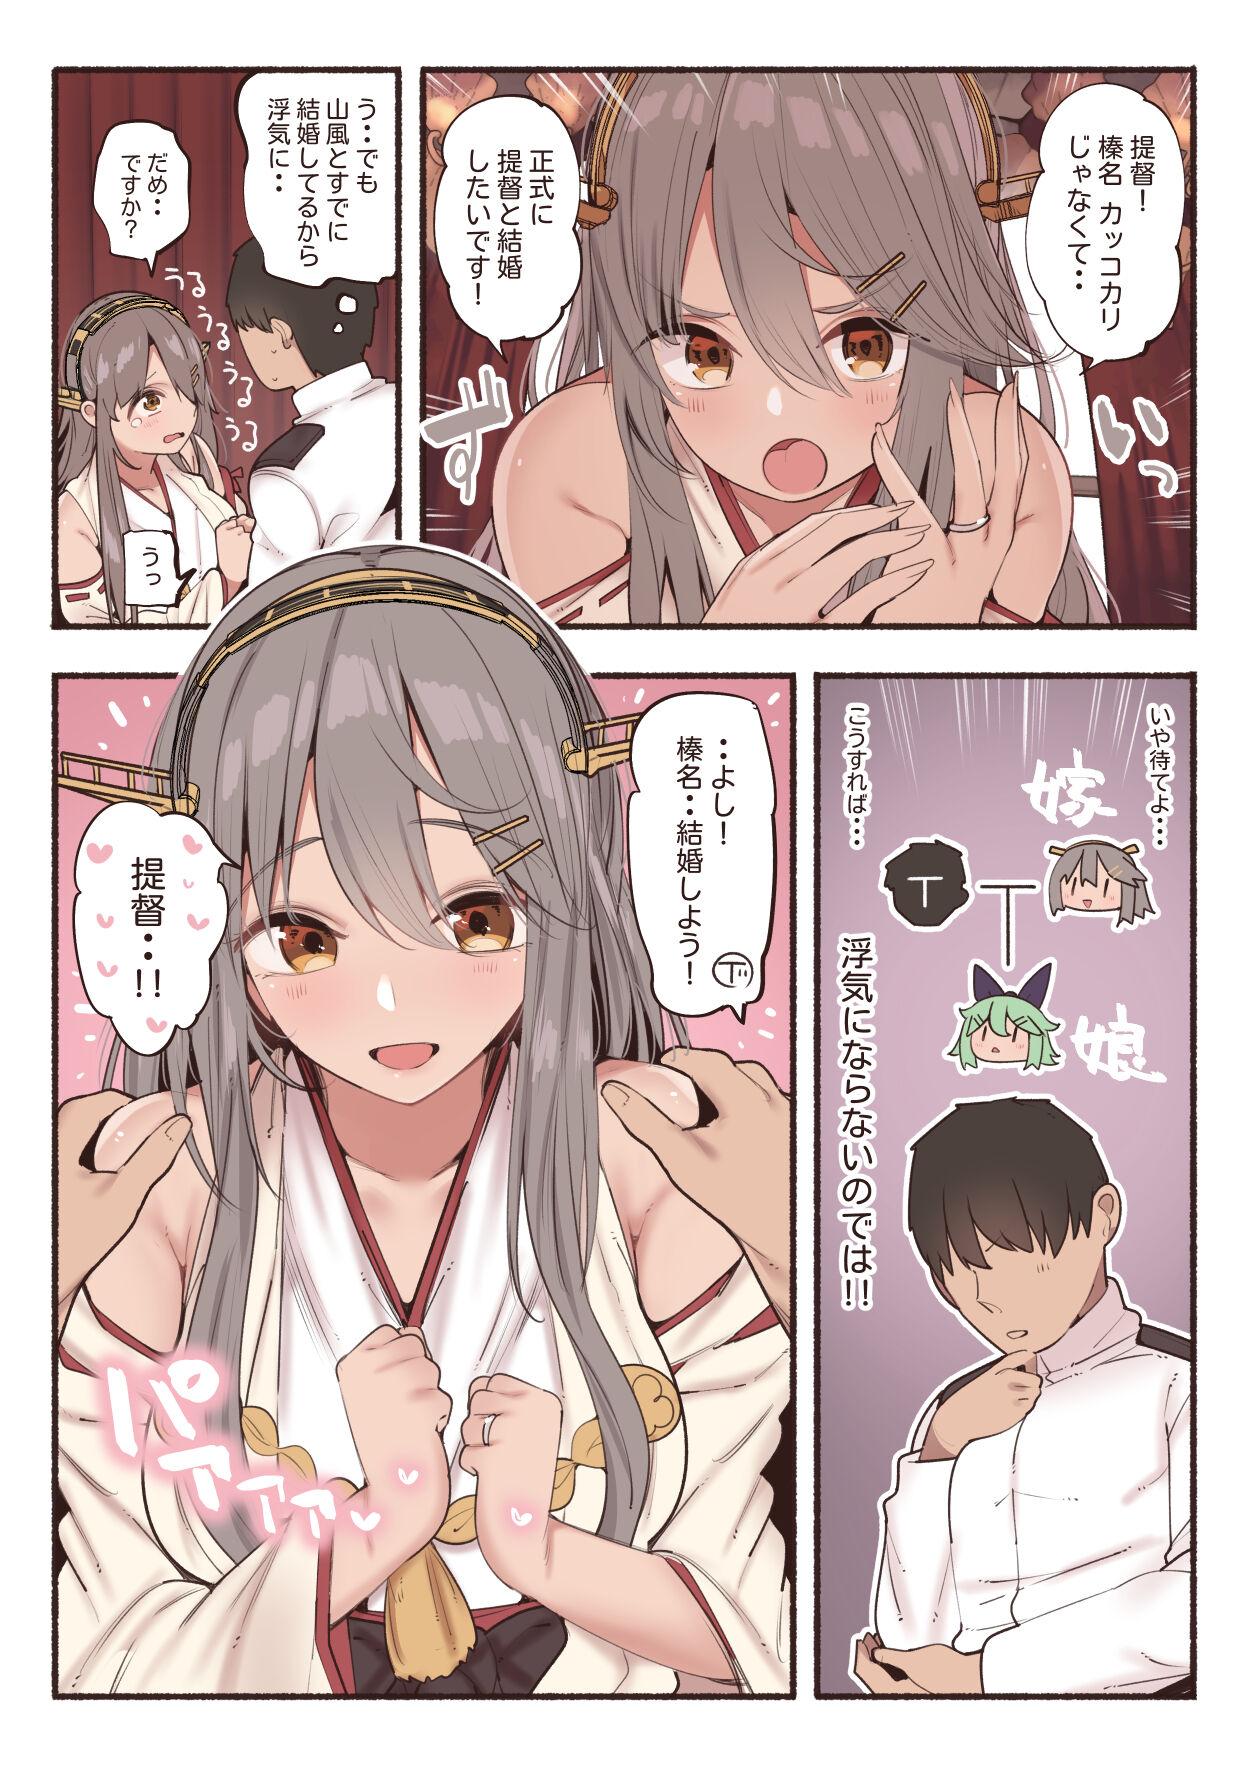 Hottie 榛名と結婚初夜 - Kantai collection Sloppy Blowjob - Page 2